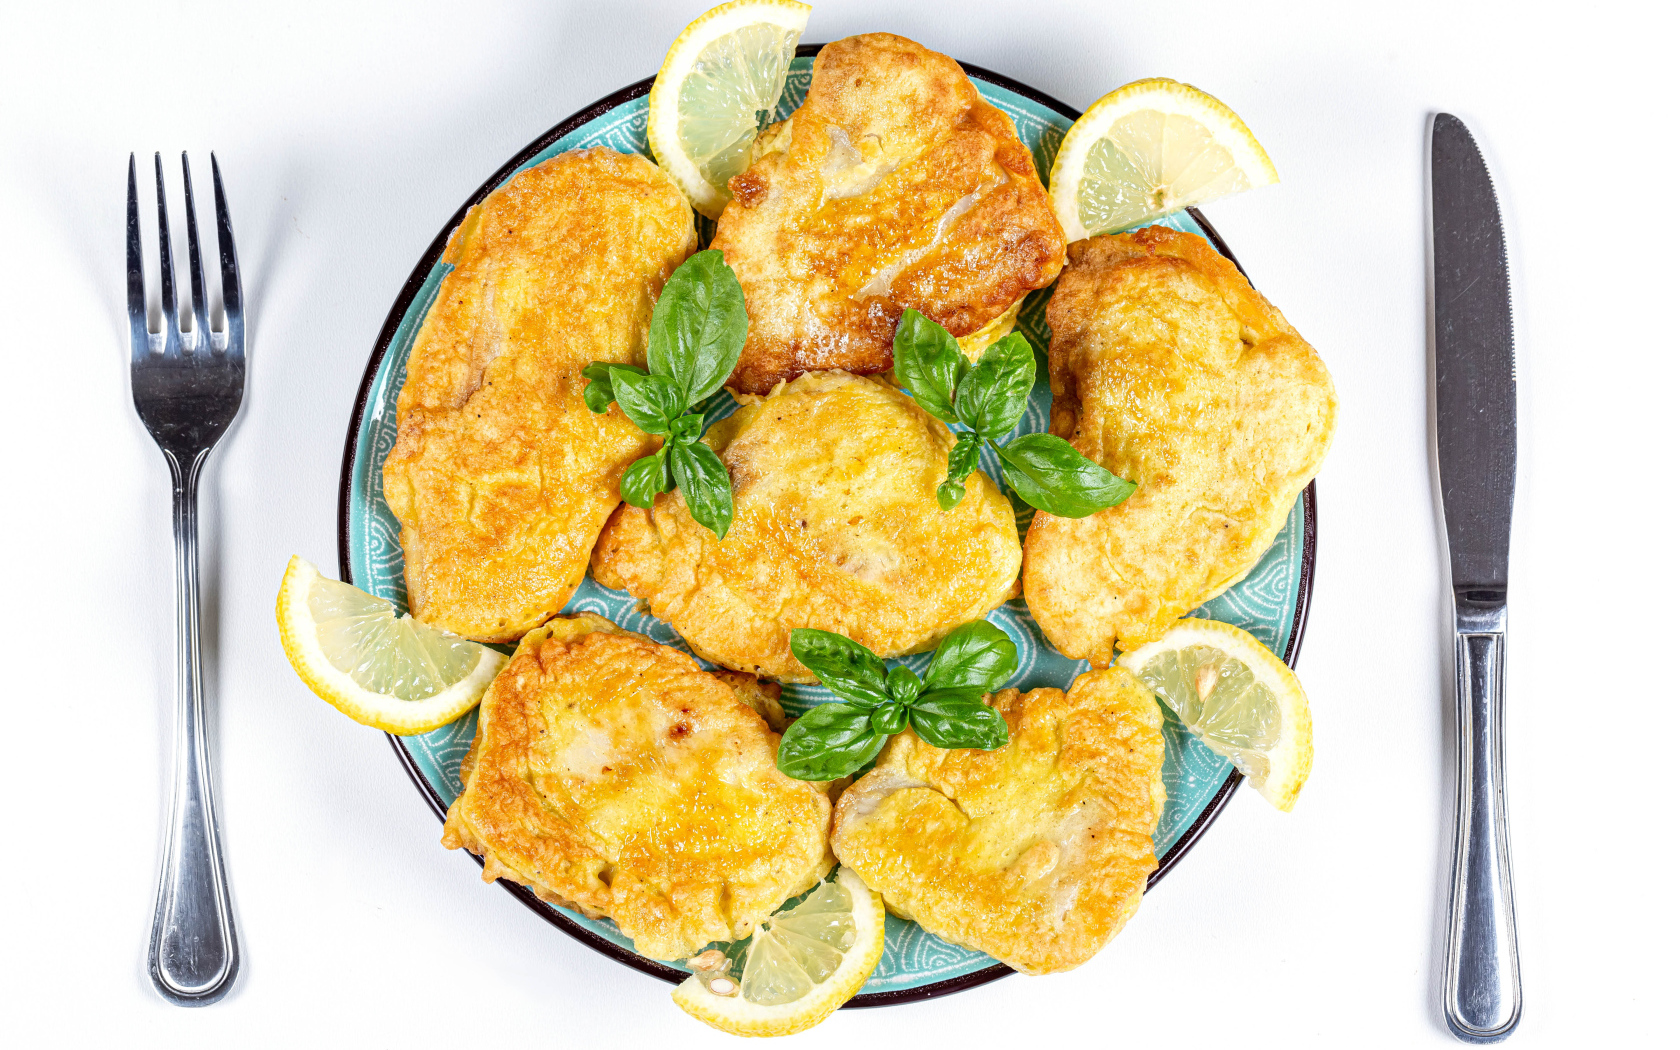 Appetizing fish in batter on a plate with lemon slices and cutlery